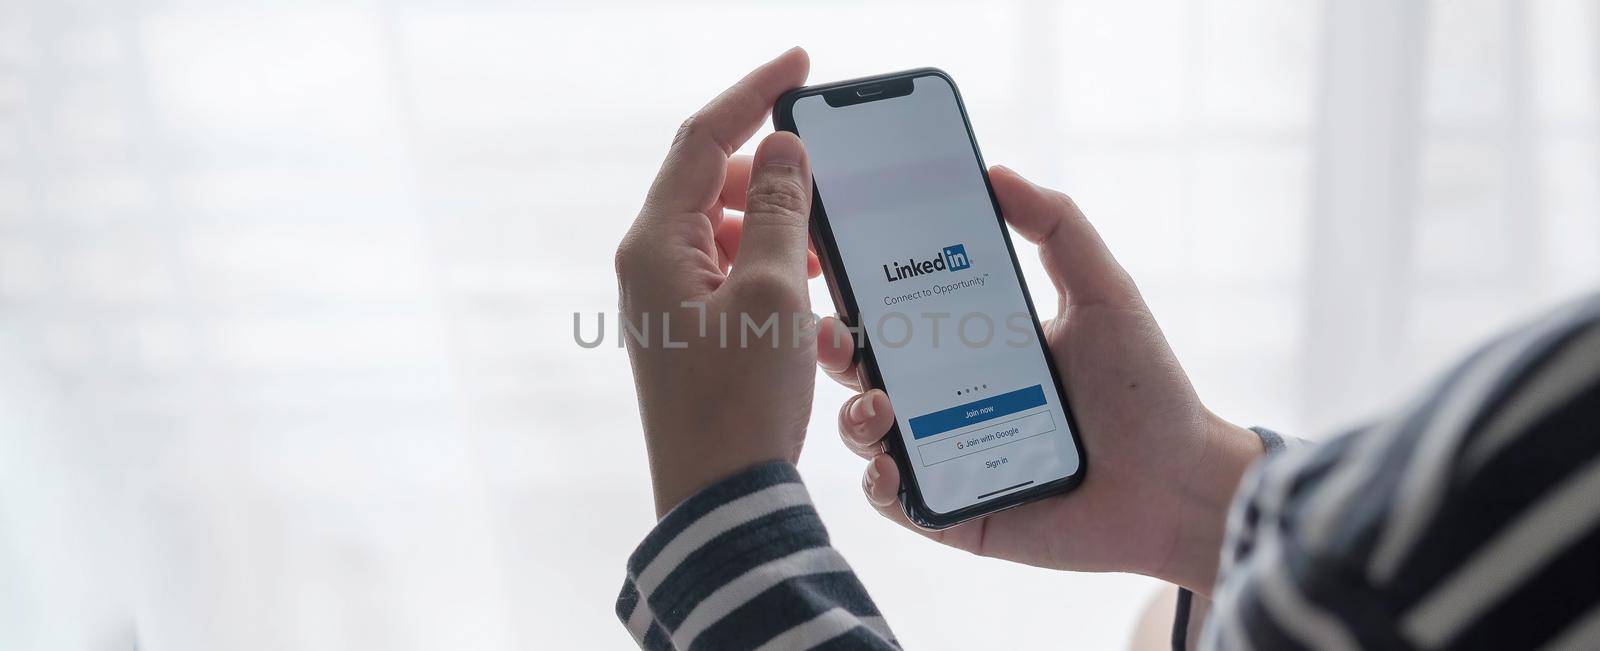 CHIANG MAI, THAILAND, JUL 12, 2021 : A women holds Apple iPhone Xs with LinkedIn application on the screen.LinkedIn is a photo-sharing app for smartphones..